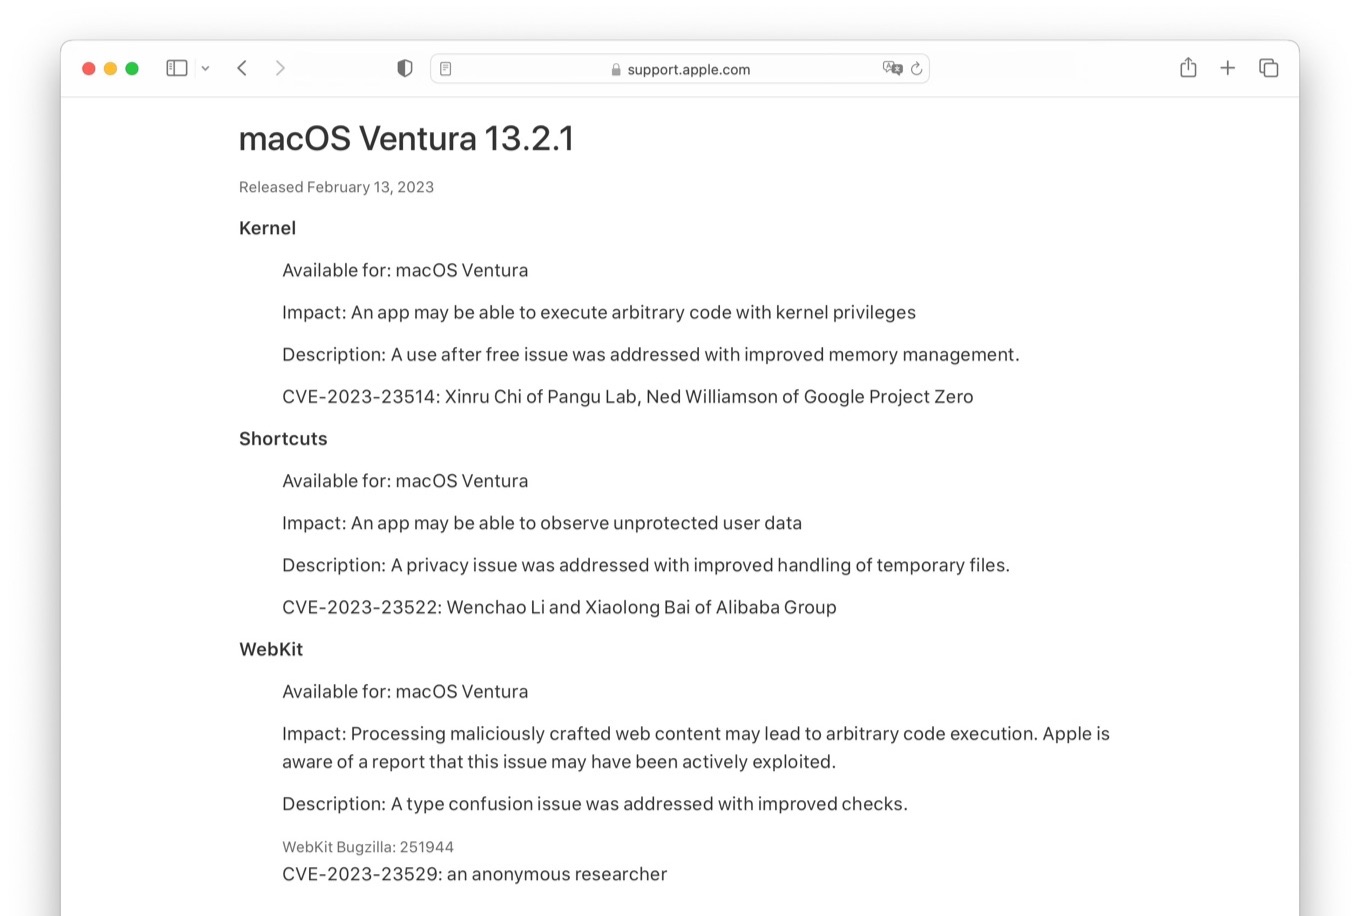 About the security content of macOS Ventura 13.2.1